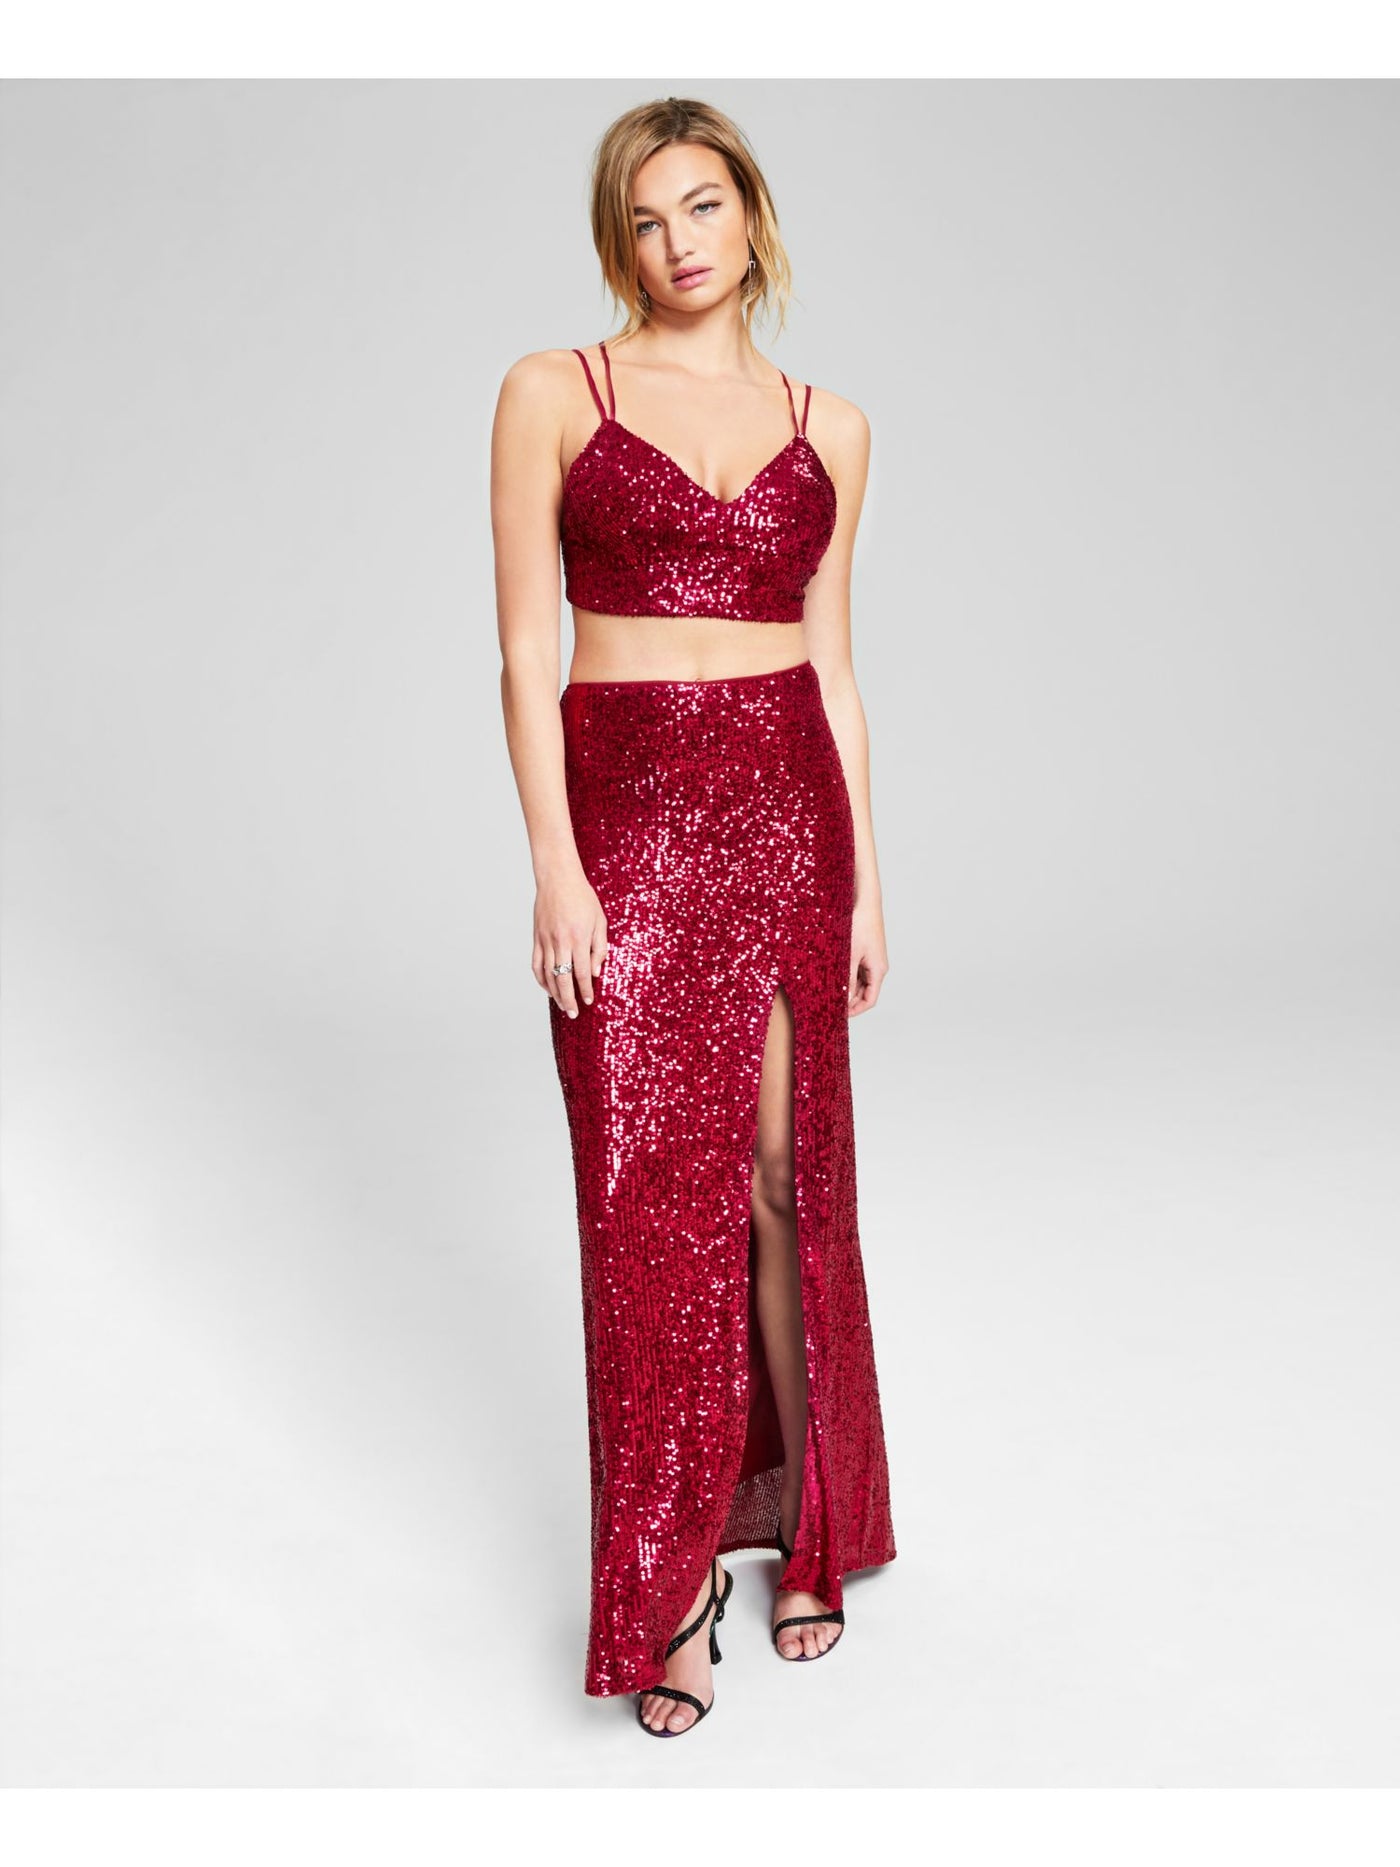 JUMP APPAREL Womens Maroon Sequined Slitted Lined Sleeveless V Neck Full-Length Prom Gown Dress Juniors 17/18